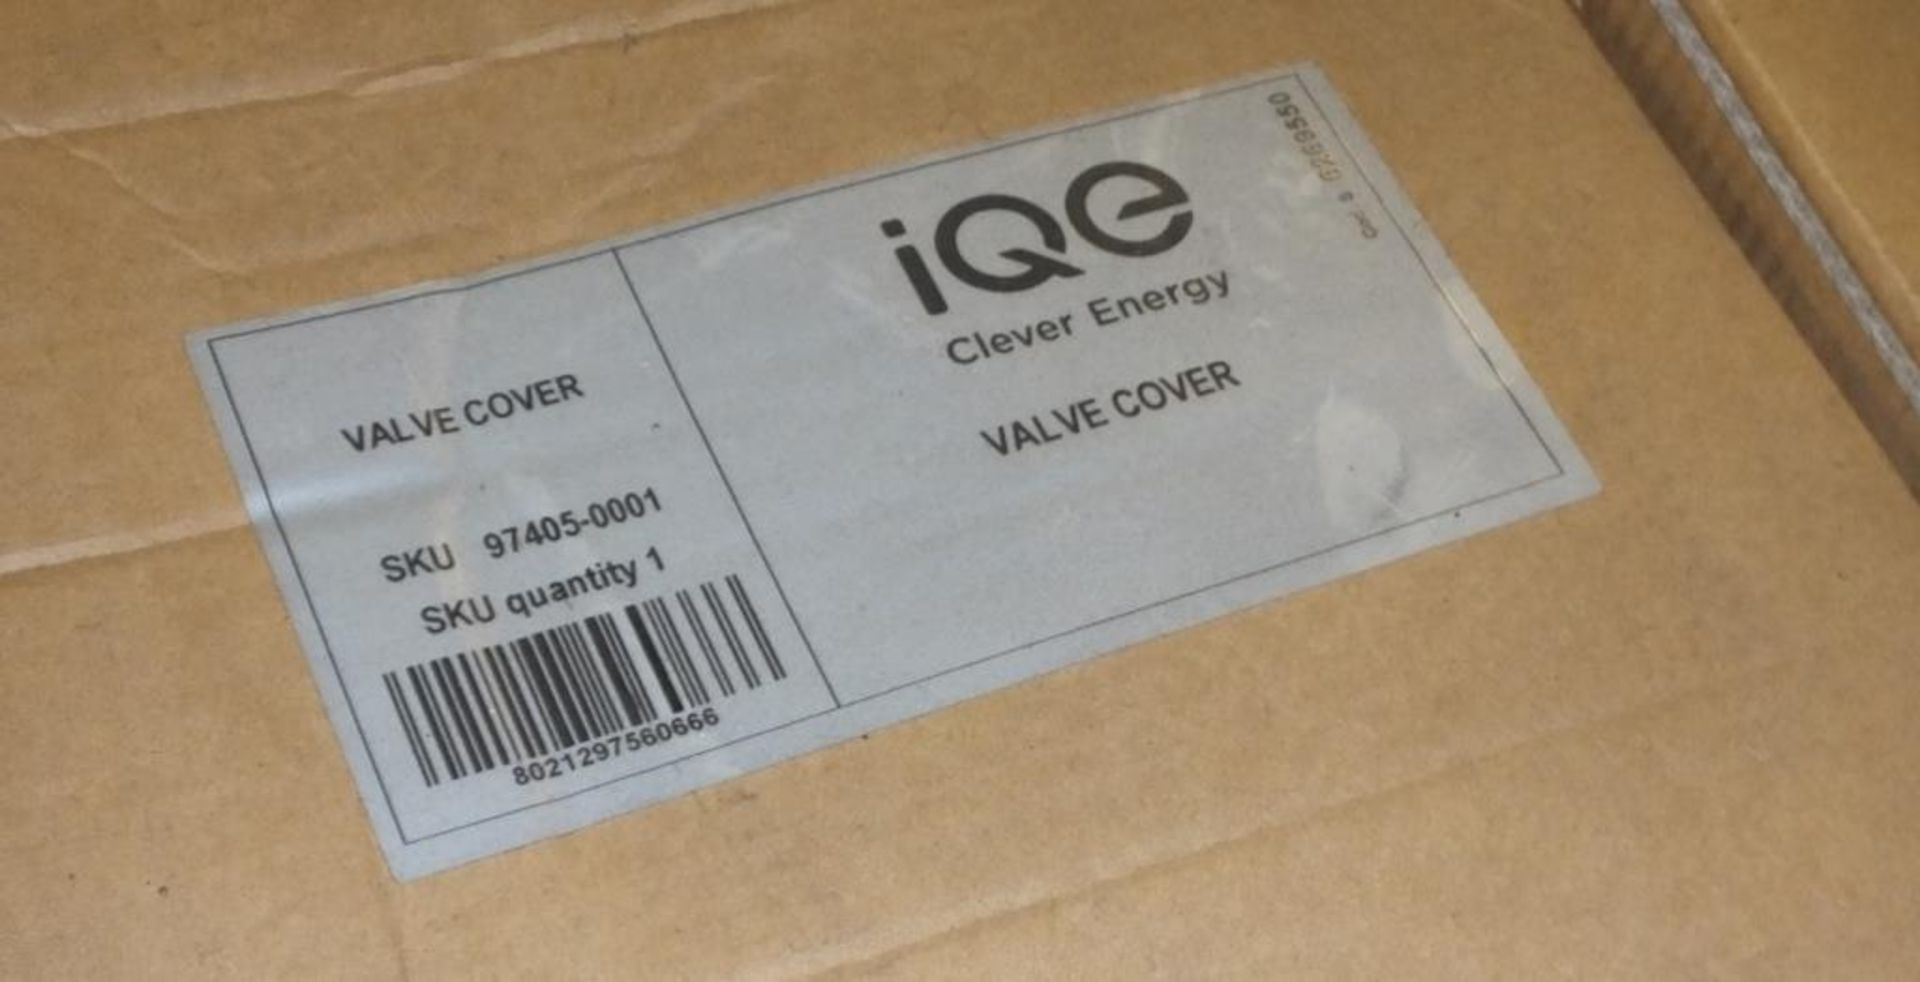 IQE Clever Energy Valve Covers - Image 3 of 3